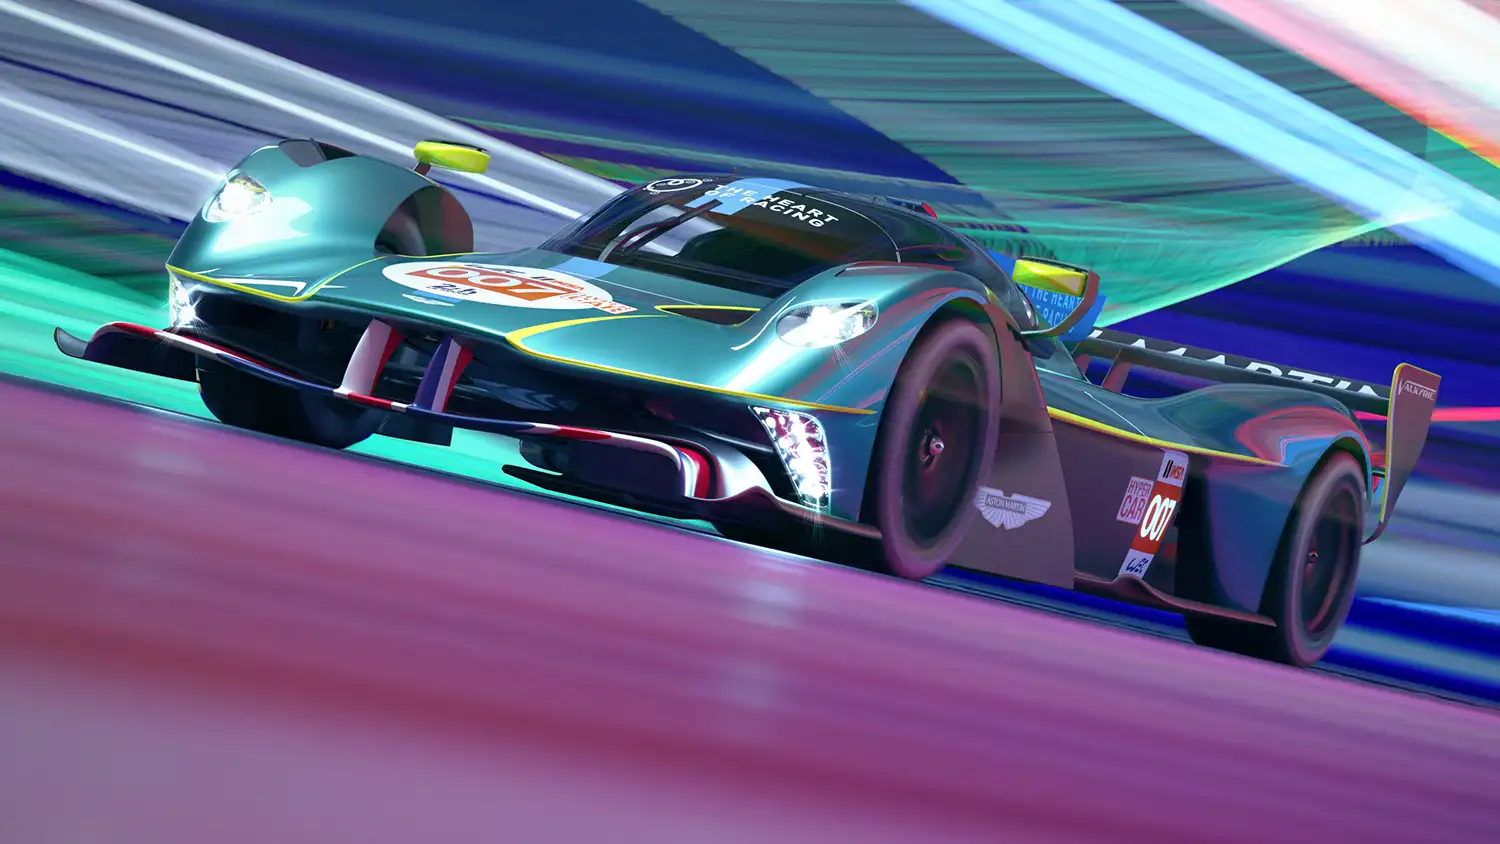 Aston Martin to Compete at Le Mans with Two Valkyrie LMH Hypercars in 2025